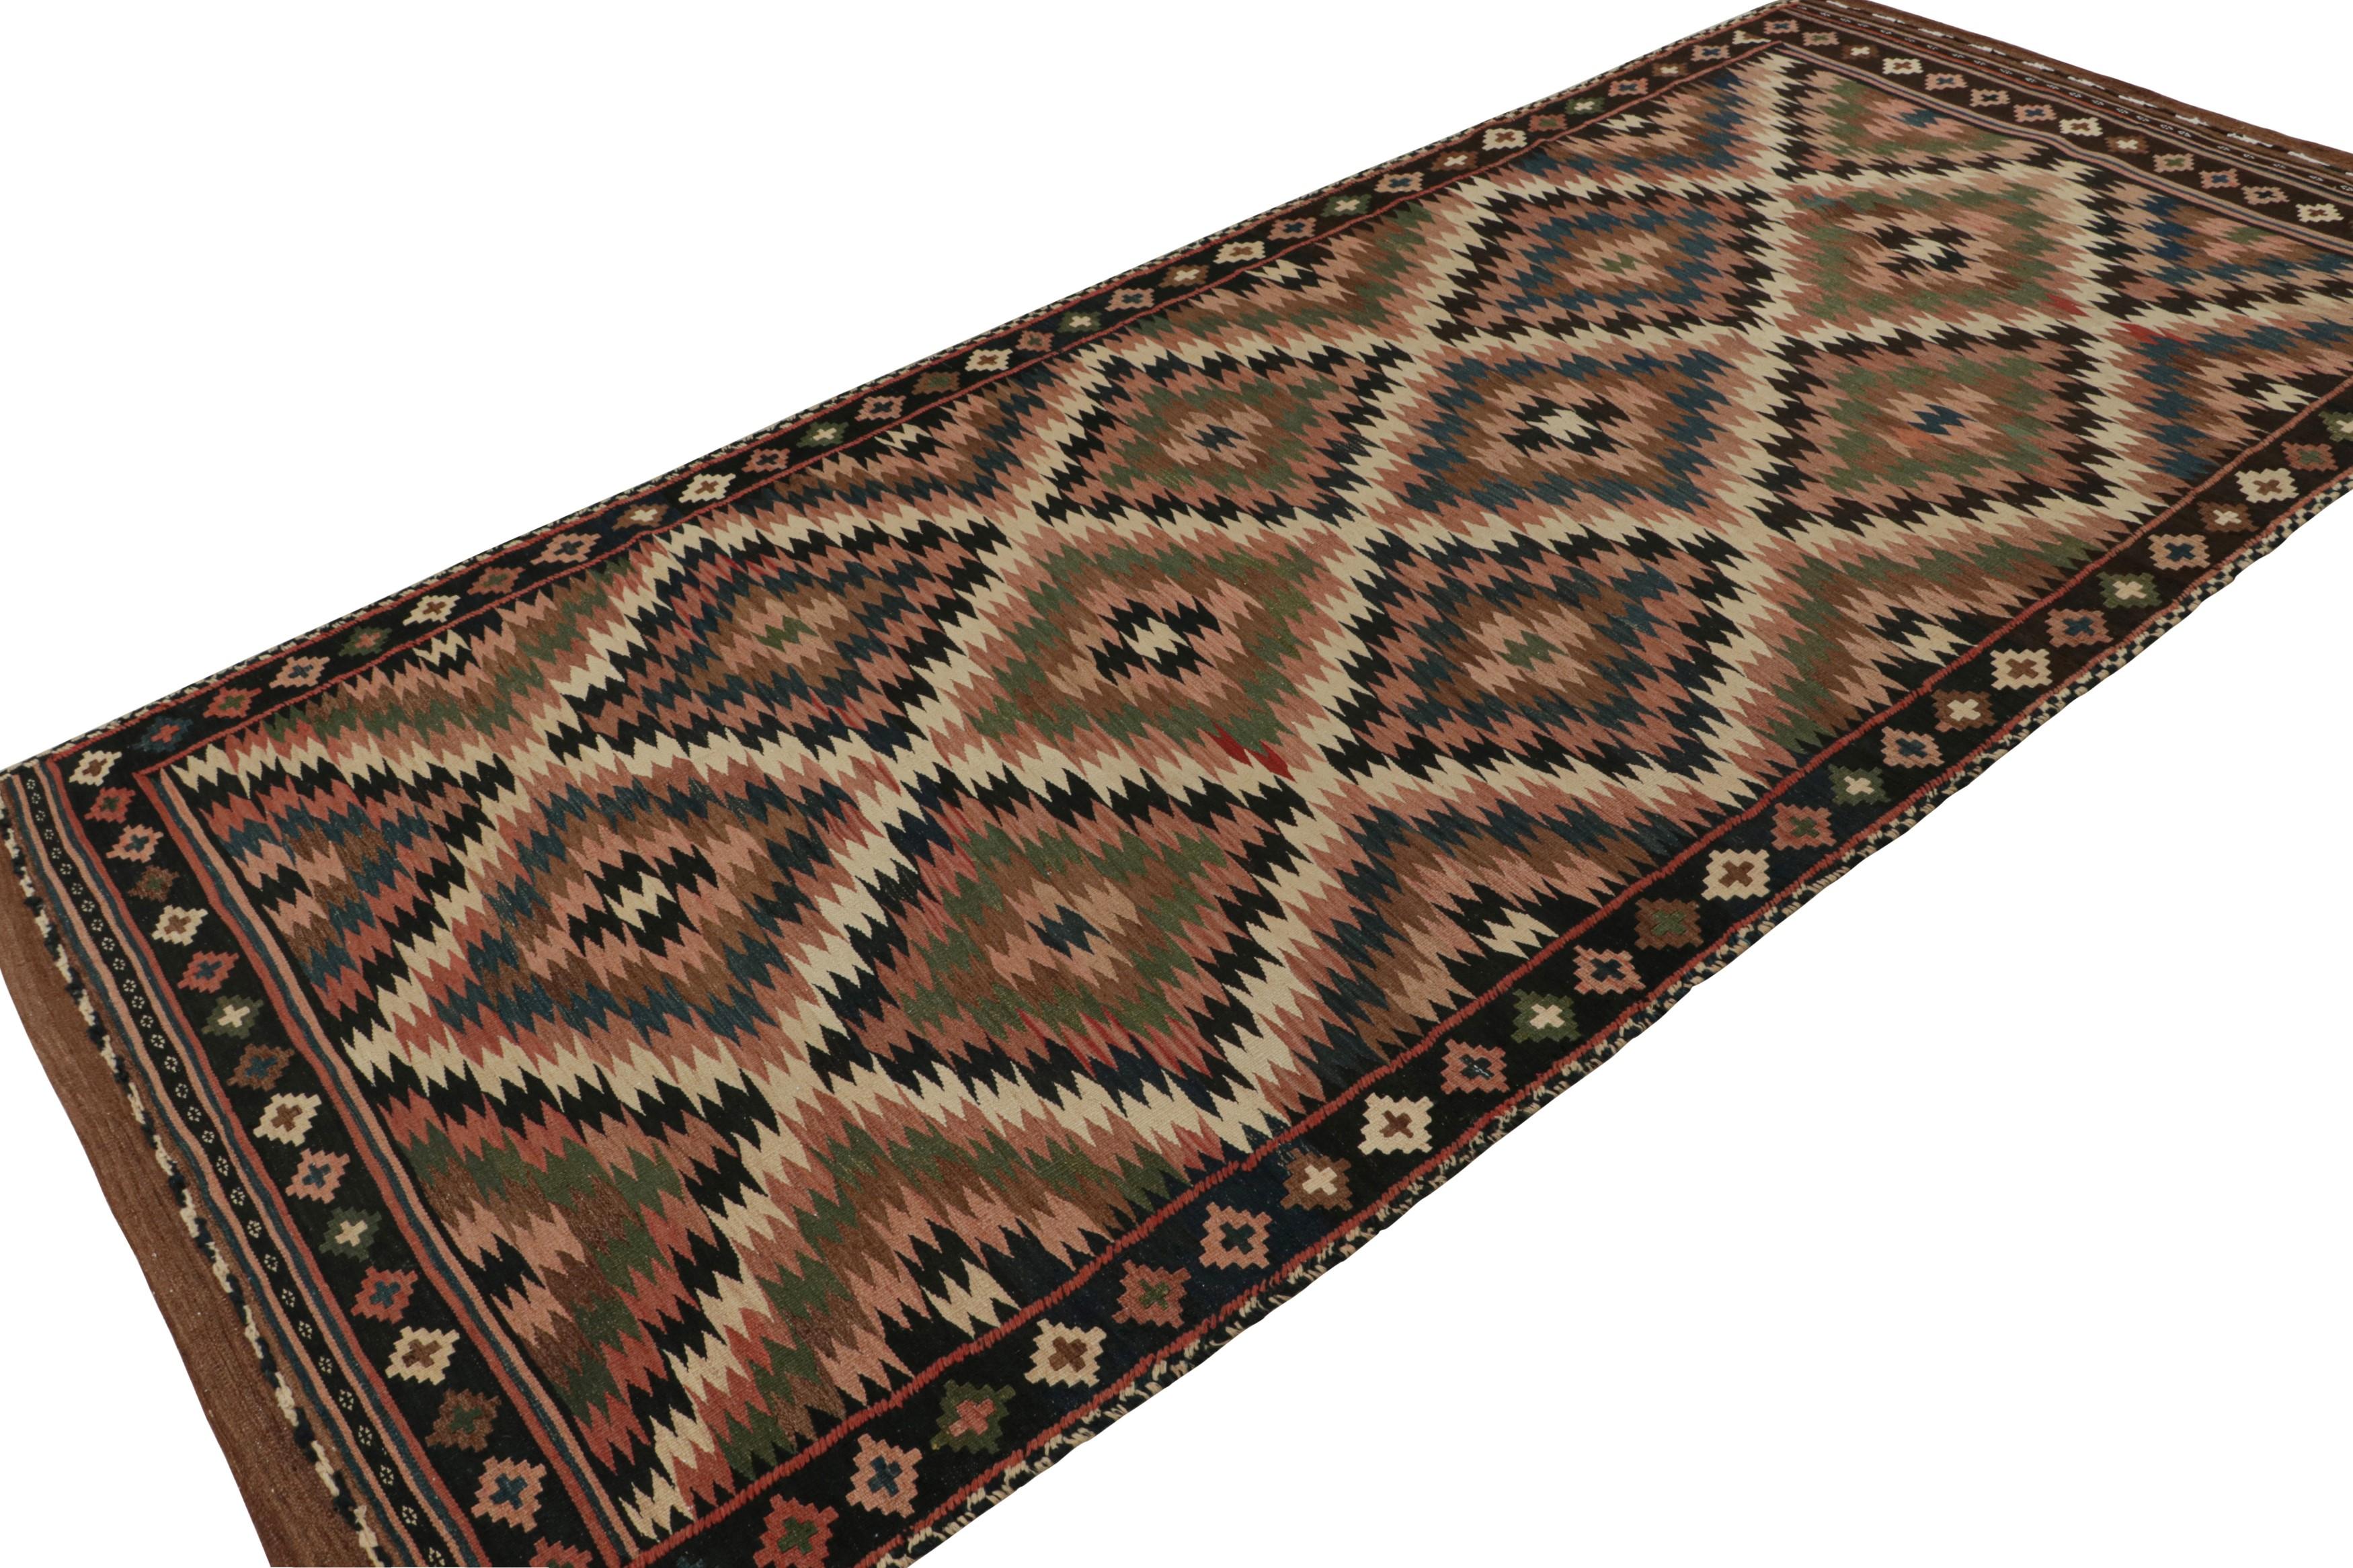 Handwoven in wool circa 1950-1960, this 6x12 vintage Afghan kilim is a new curation from Rug & Kilim’s collection. 

On the Design:

Specifically believed to be coming from tribal weavers, this 6x12 flatweave boasts a rich personality with